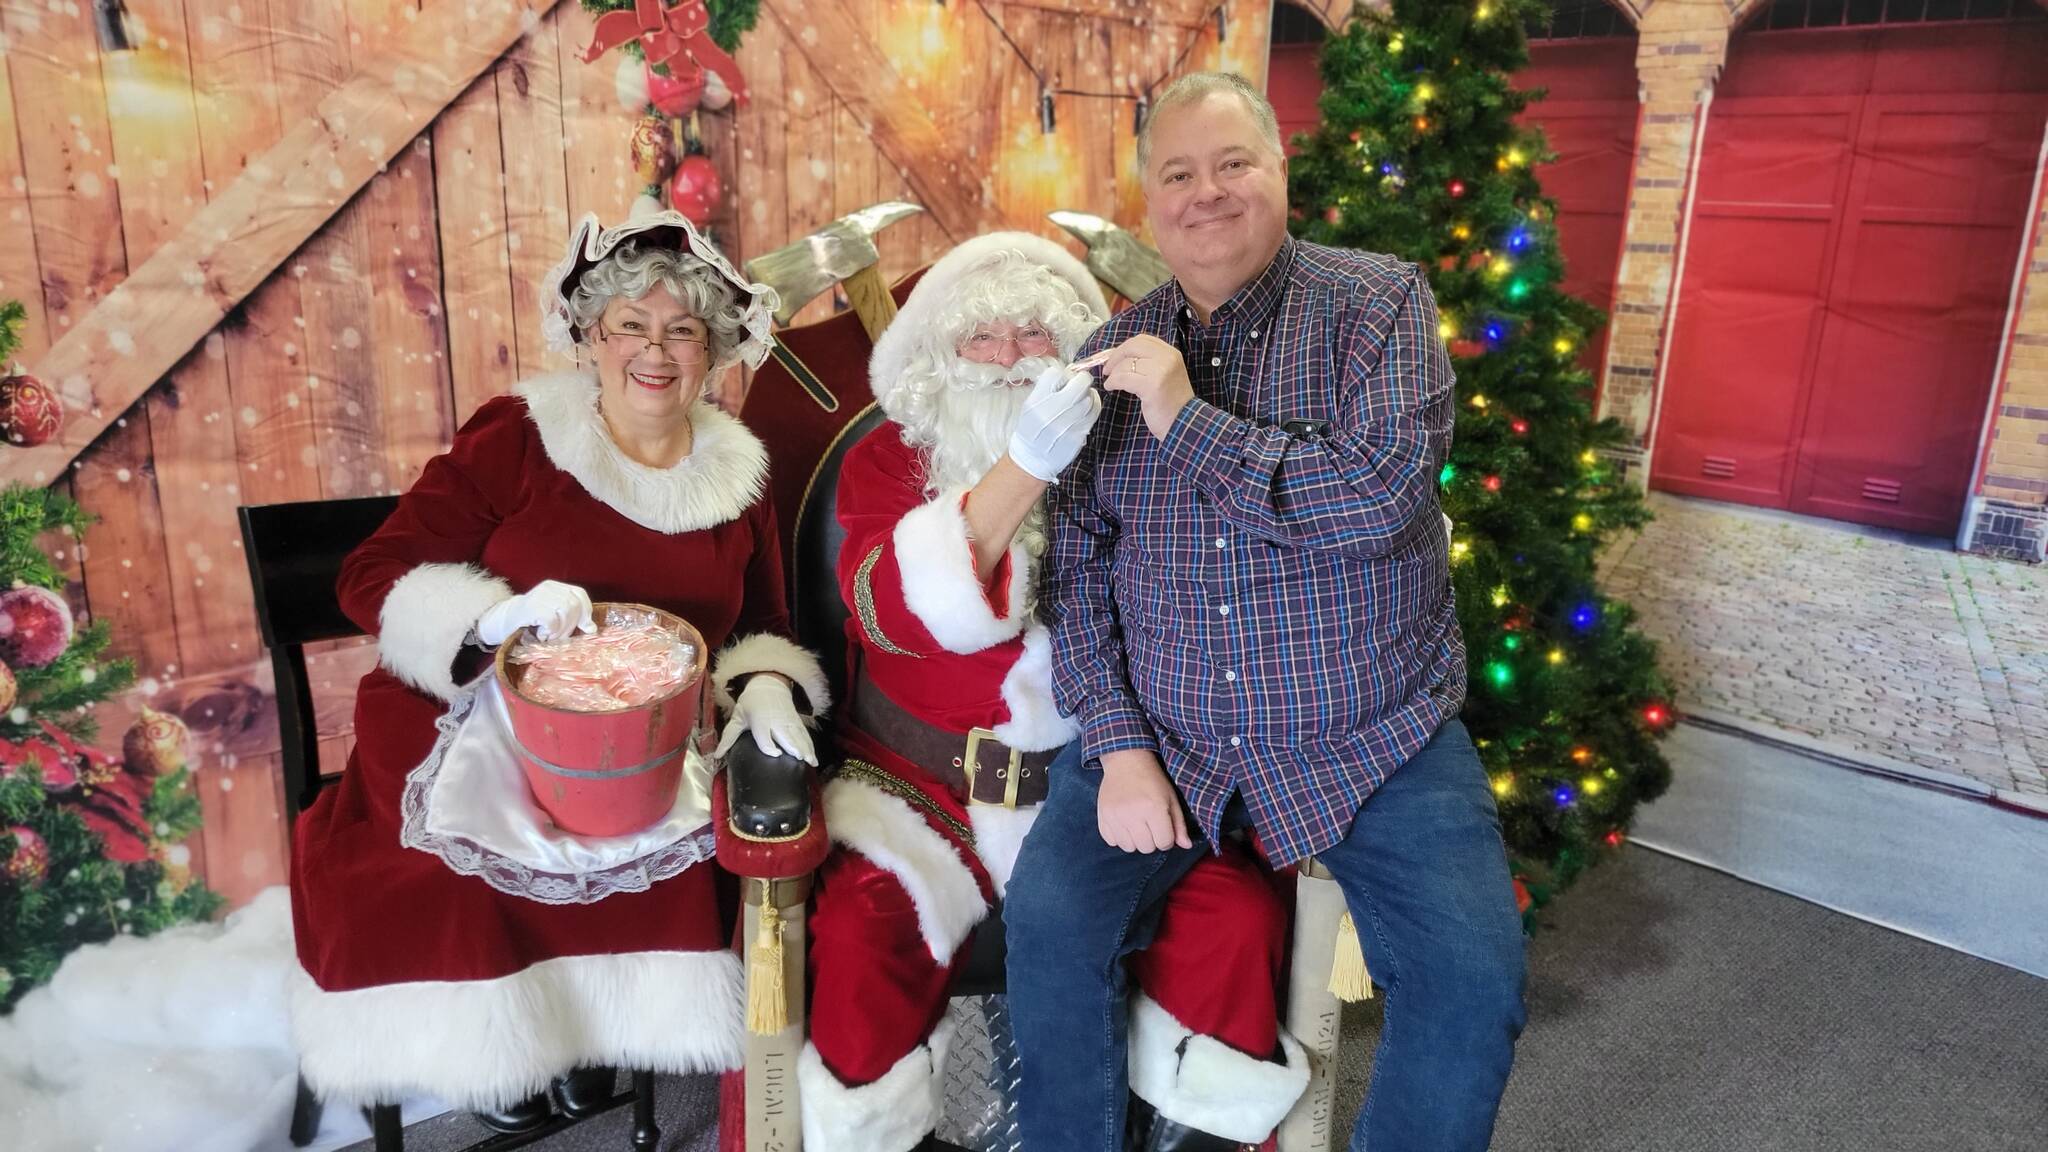 SKFR Assistant Chief Kevin Crossen pleads his case to Santa Claus and Mrs. Claus to end up on the nice list this year at the first-ever SKFR Santa event held on Sunday, Dec. 18. Photo courtesy of South King Fire and Rescue